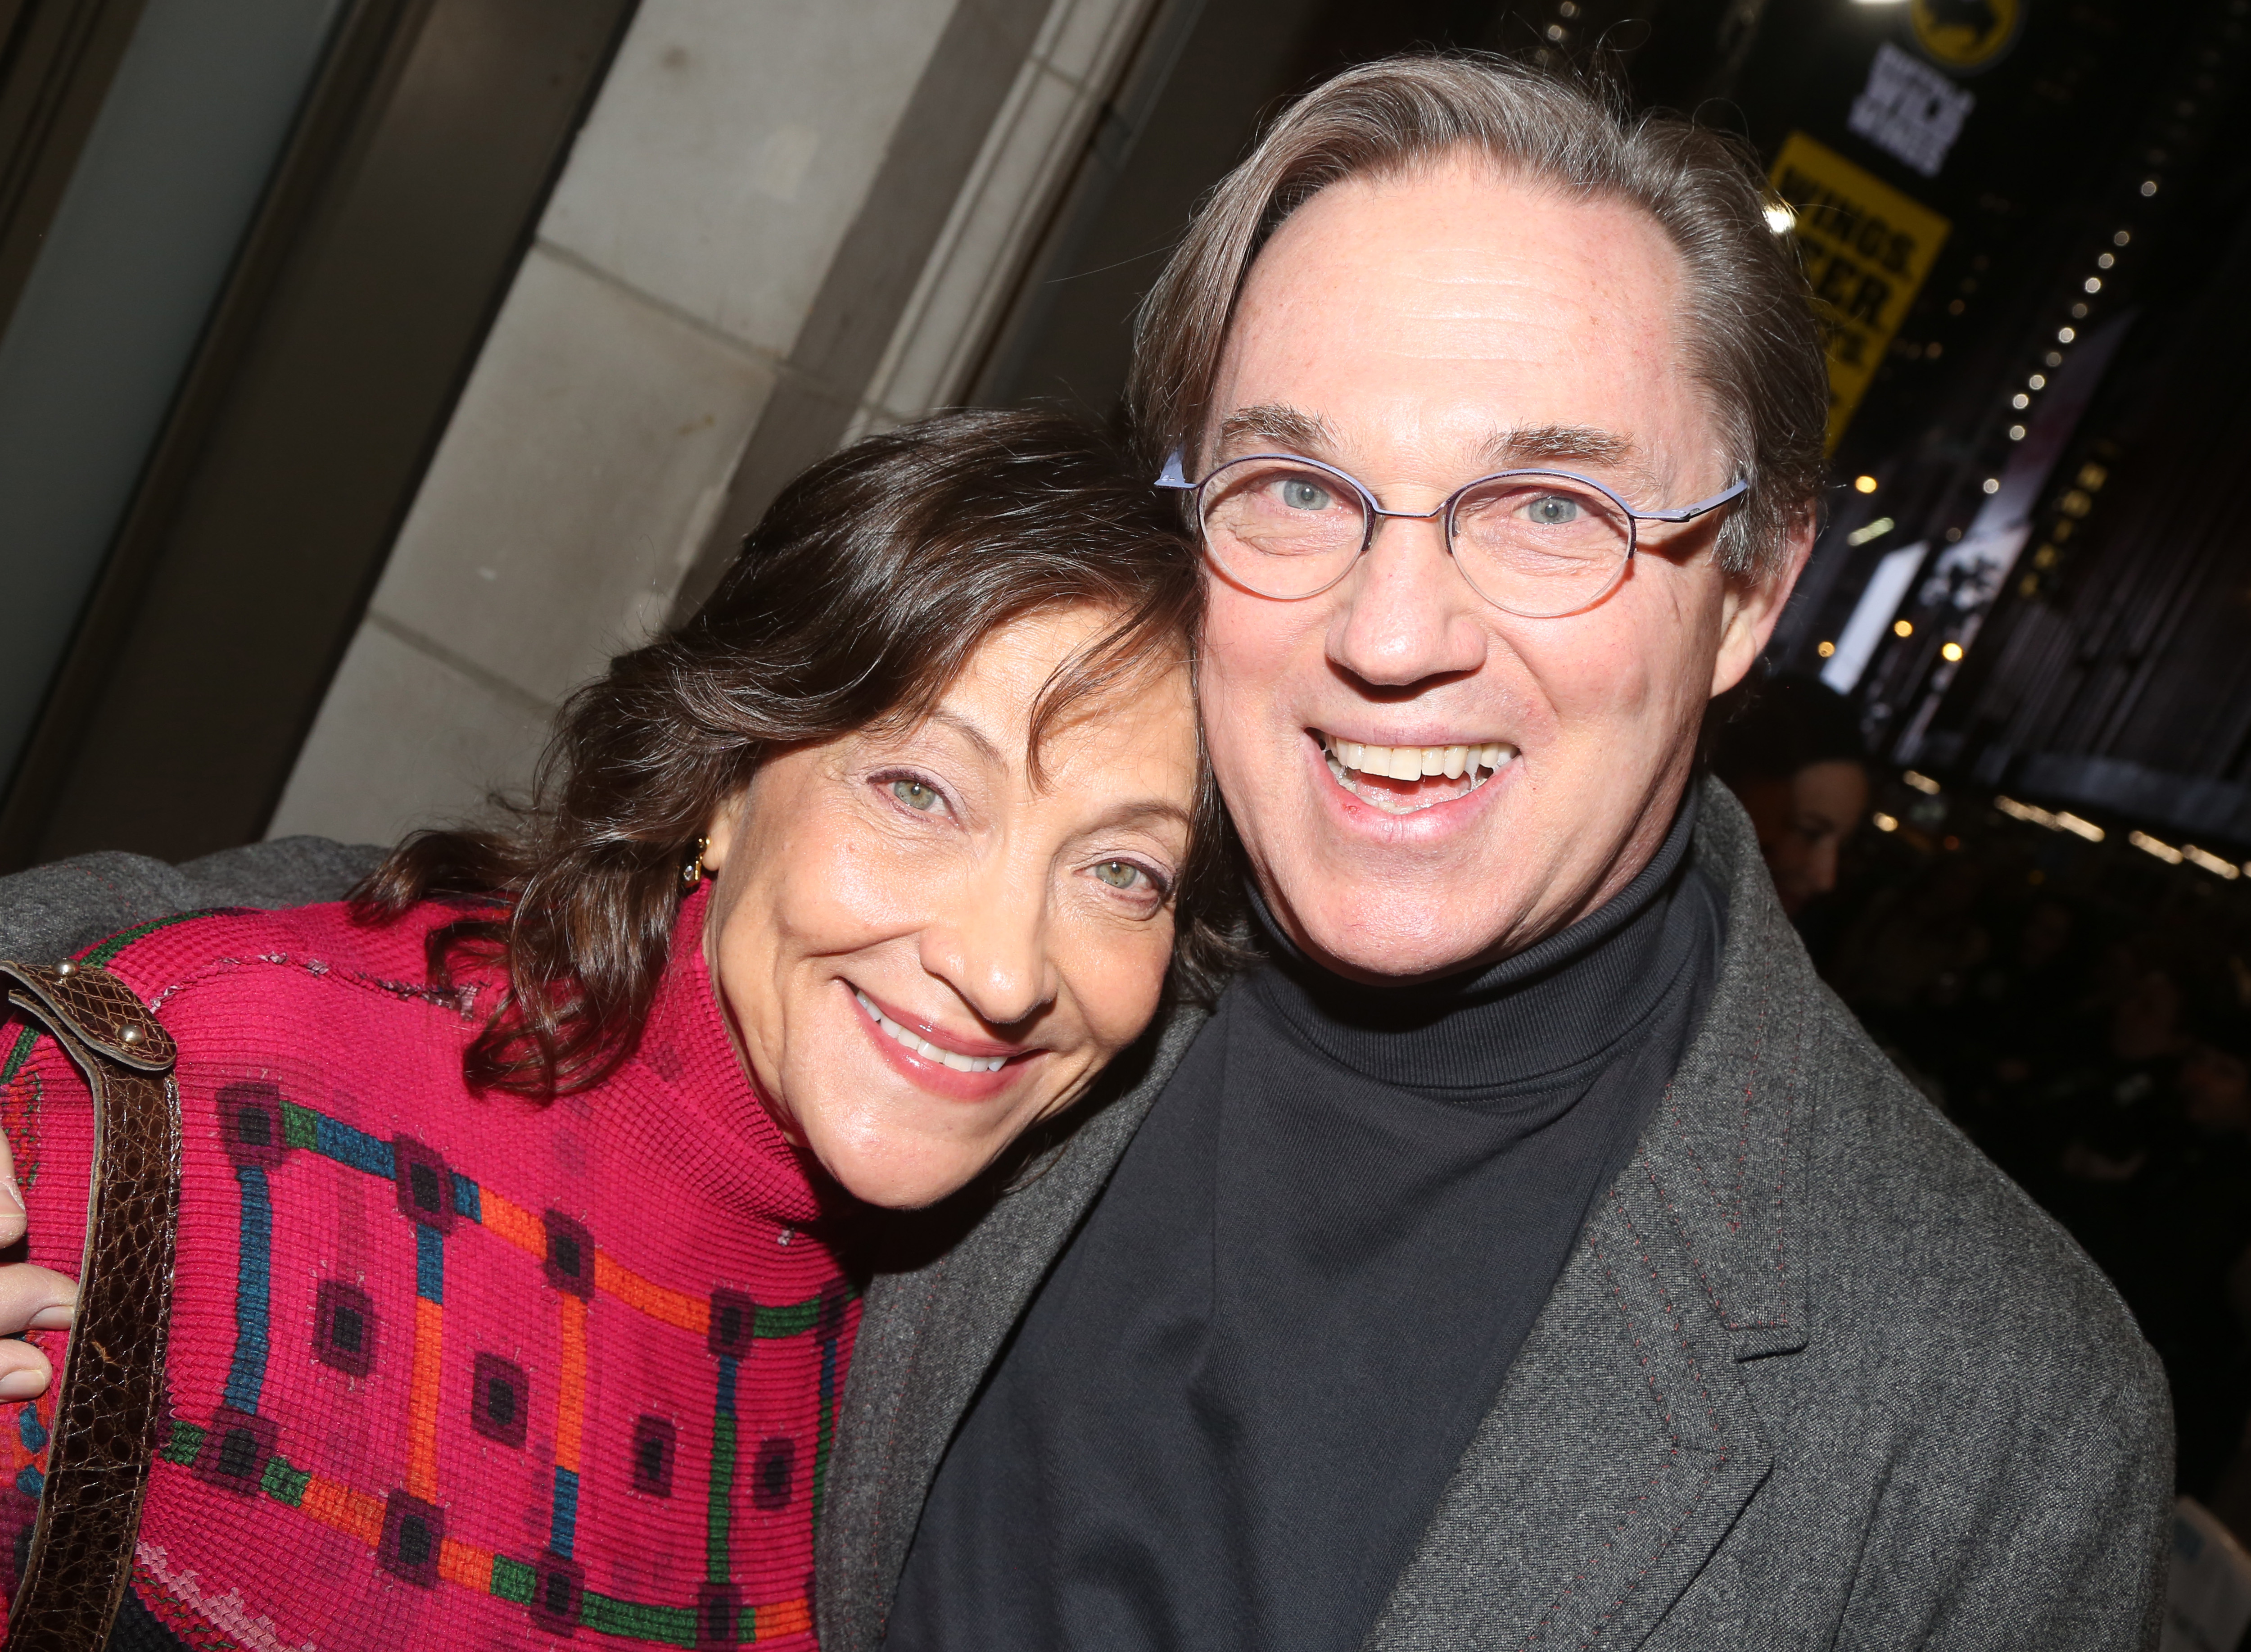 Georgiana Bischoff and her husband Richard Thomas pose at the opening night of the new play "My Name Is Lucy Barton" on Broadway on January 15, 2020, in New York City | Source: Getty Images